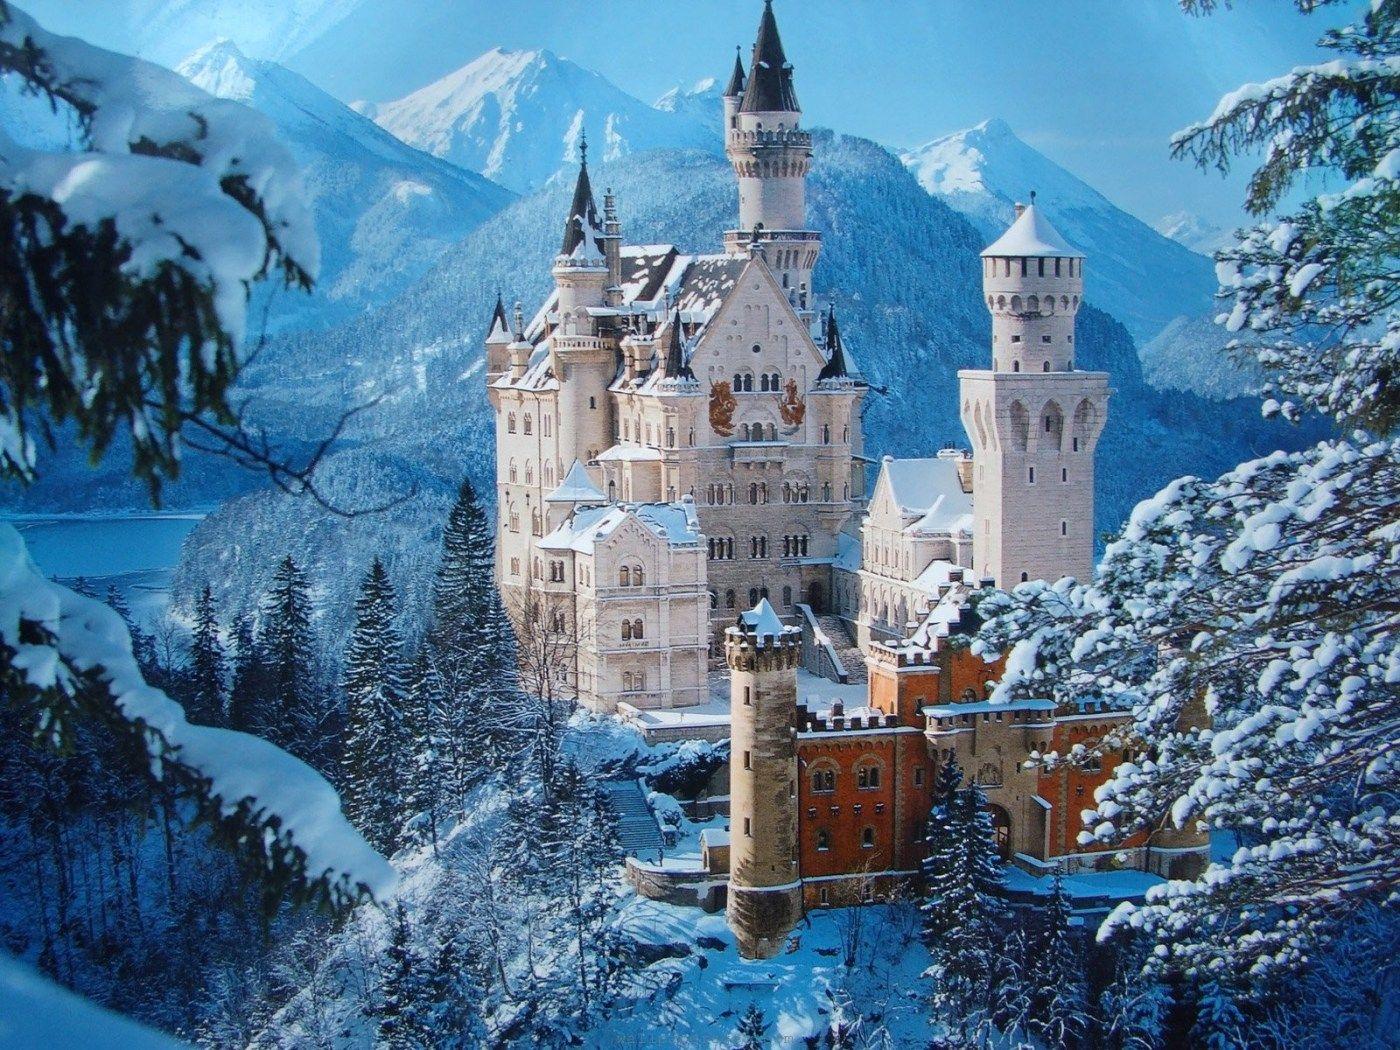 Beautiful Castle Image in 4K Ultra HD download free at